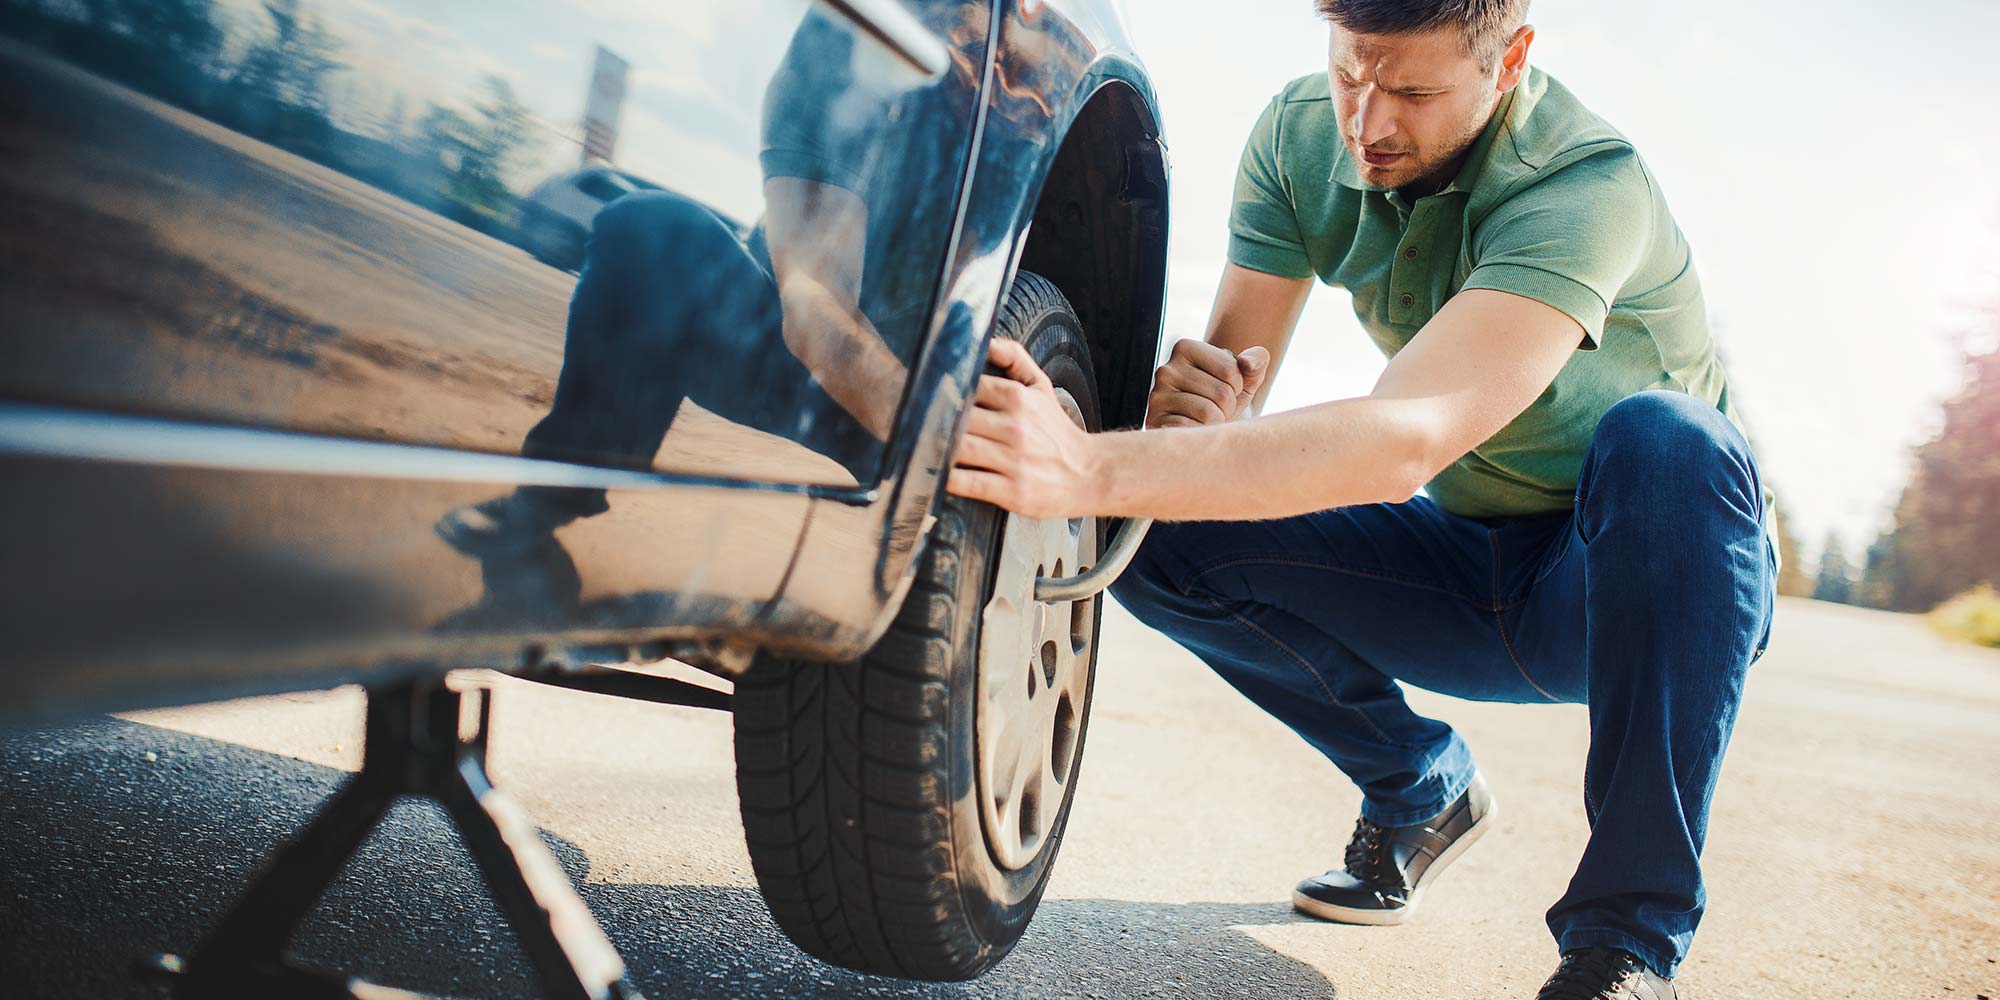 How to Put Air in a Flat Tire at Home